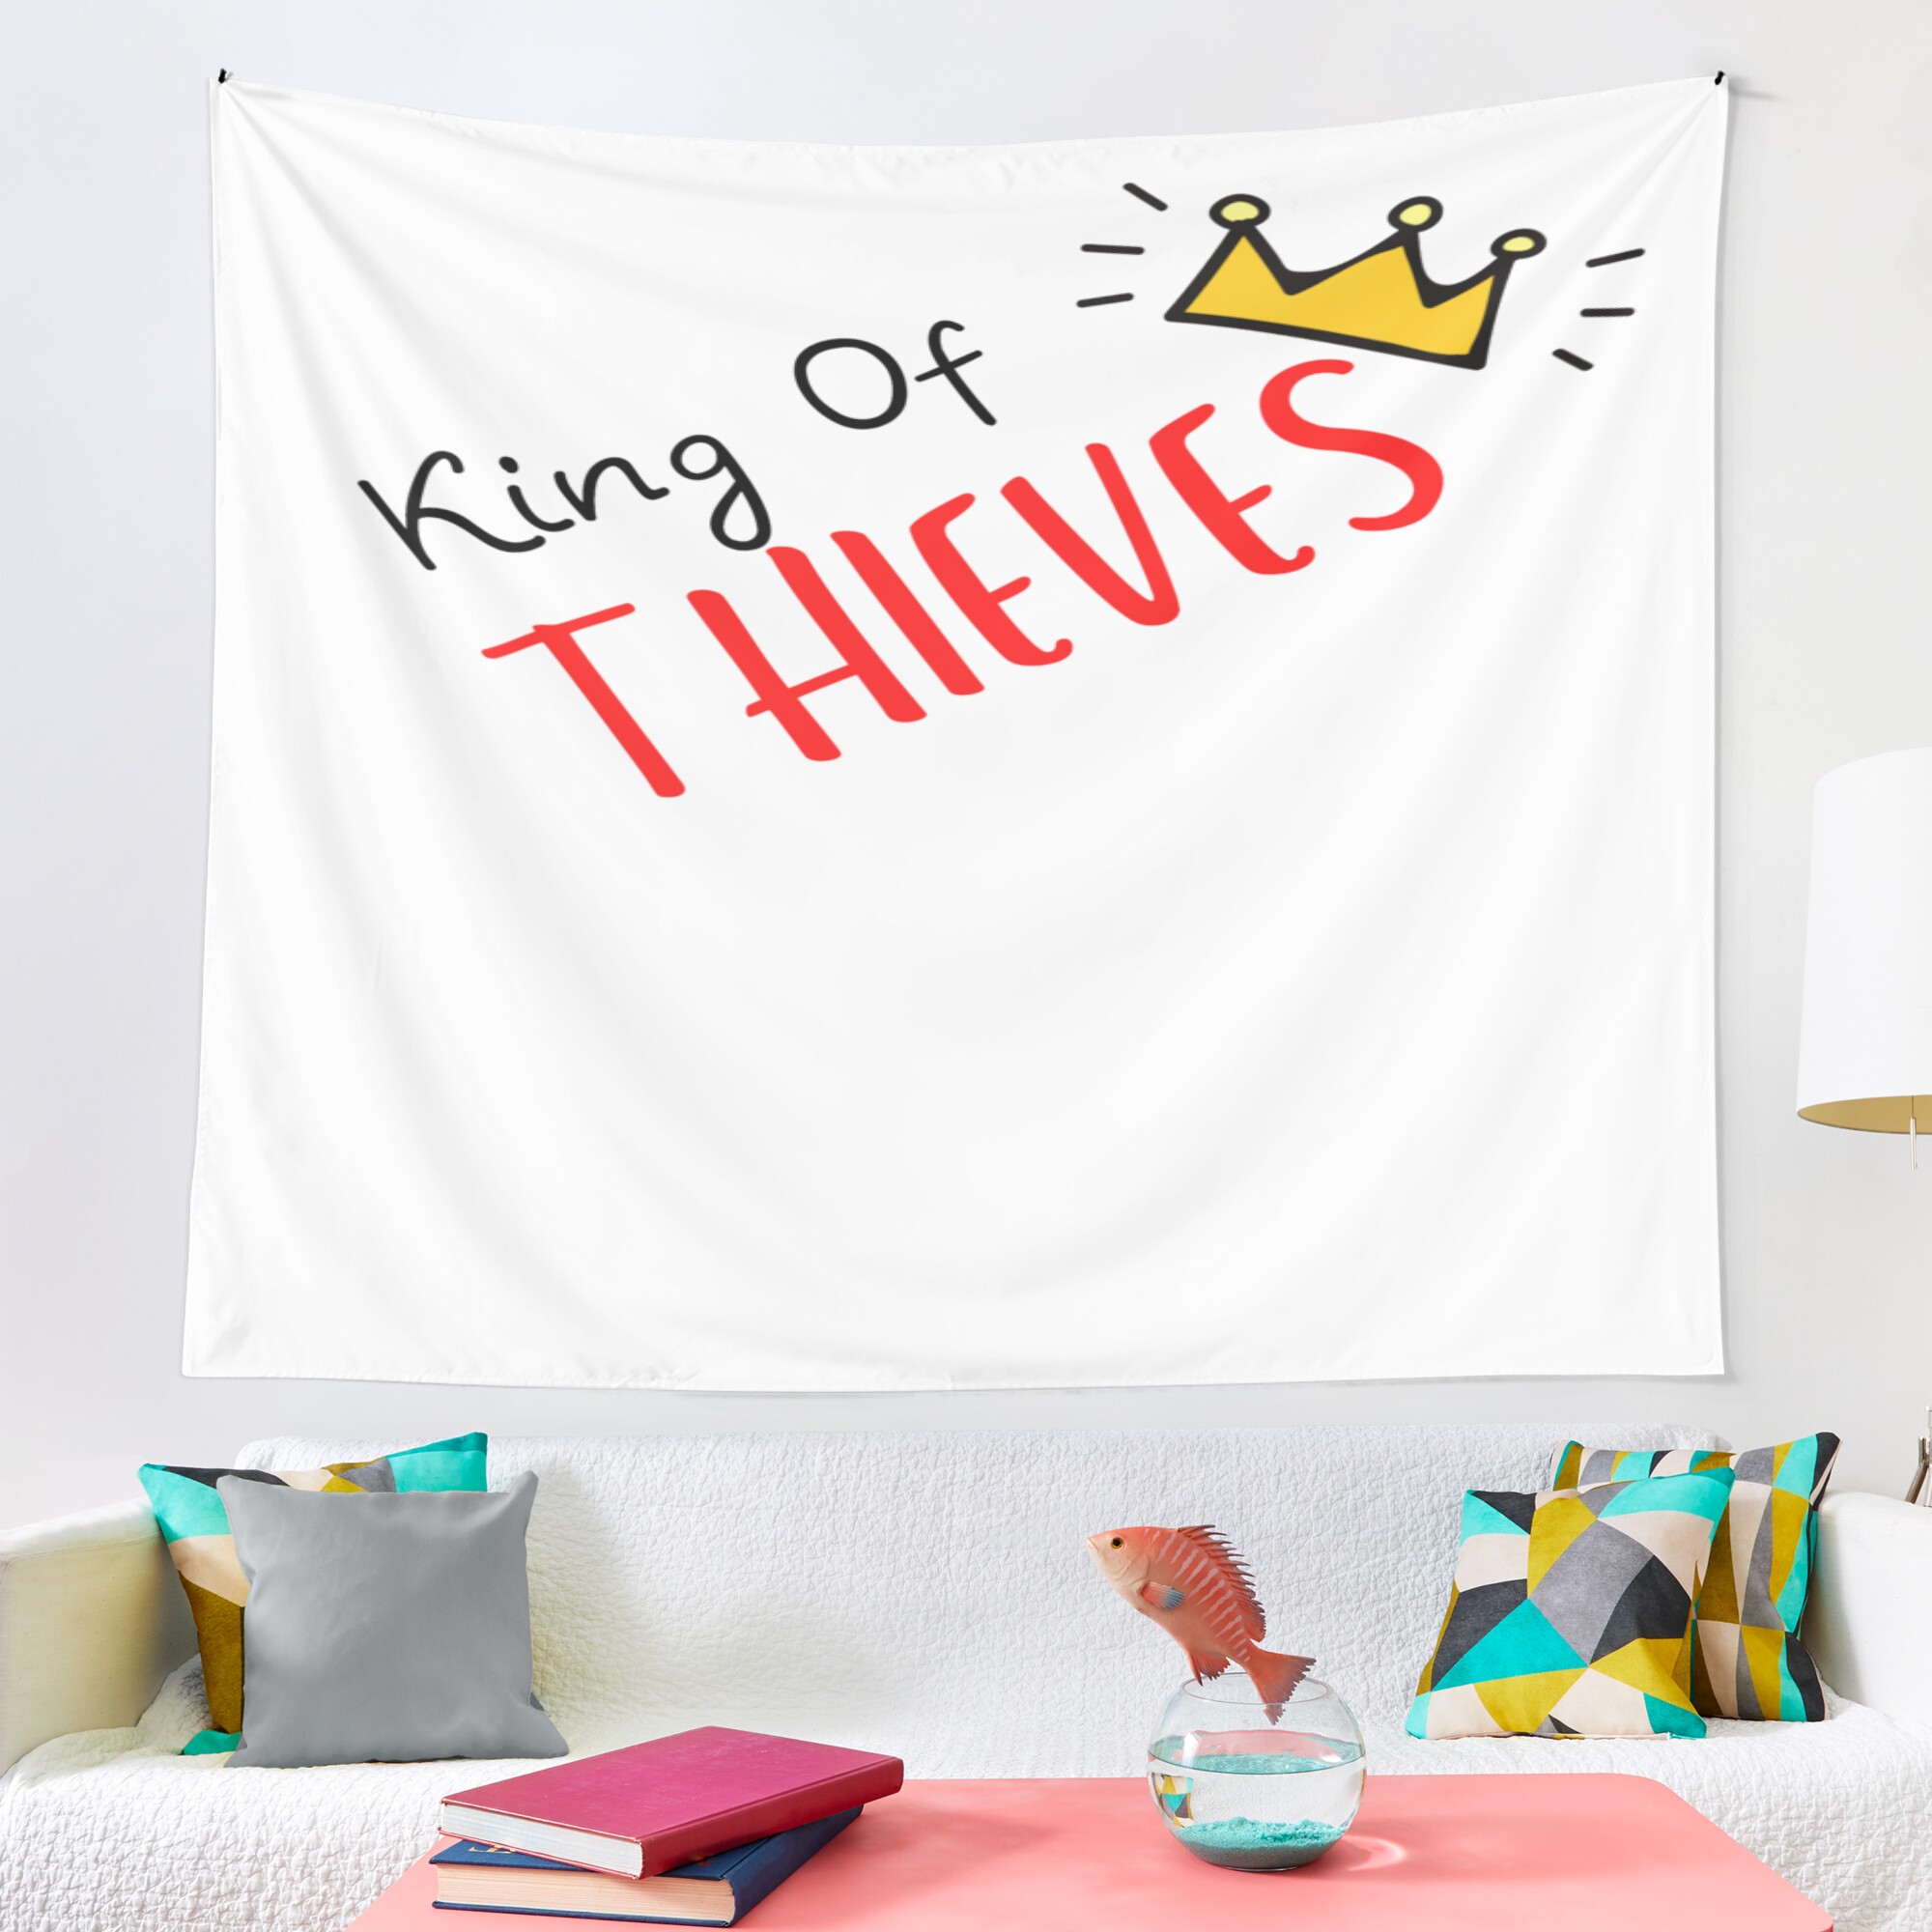 urtapestry lifestyle largesquare2000x2000 15 - 100 Thieves Shop